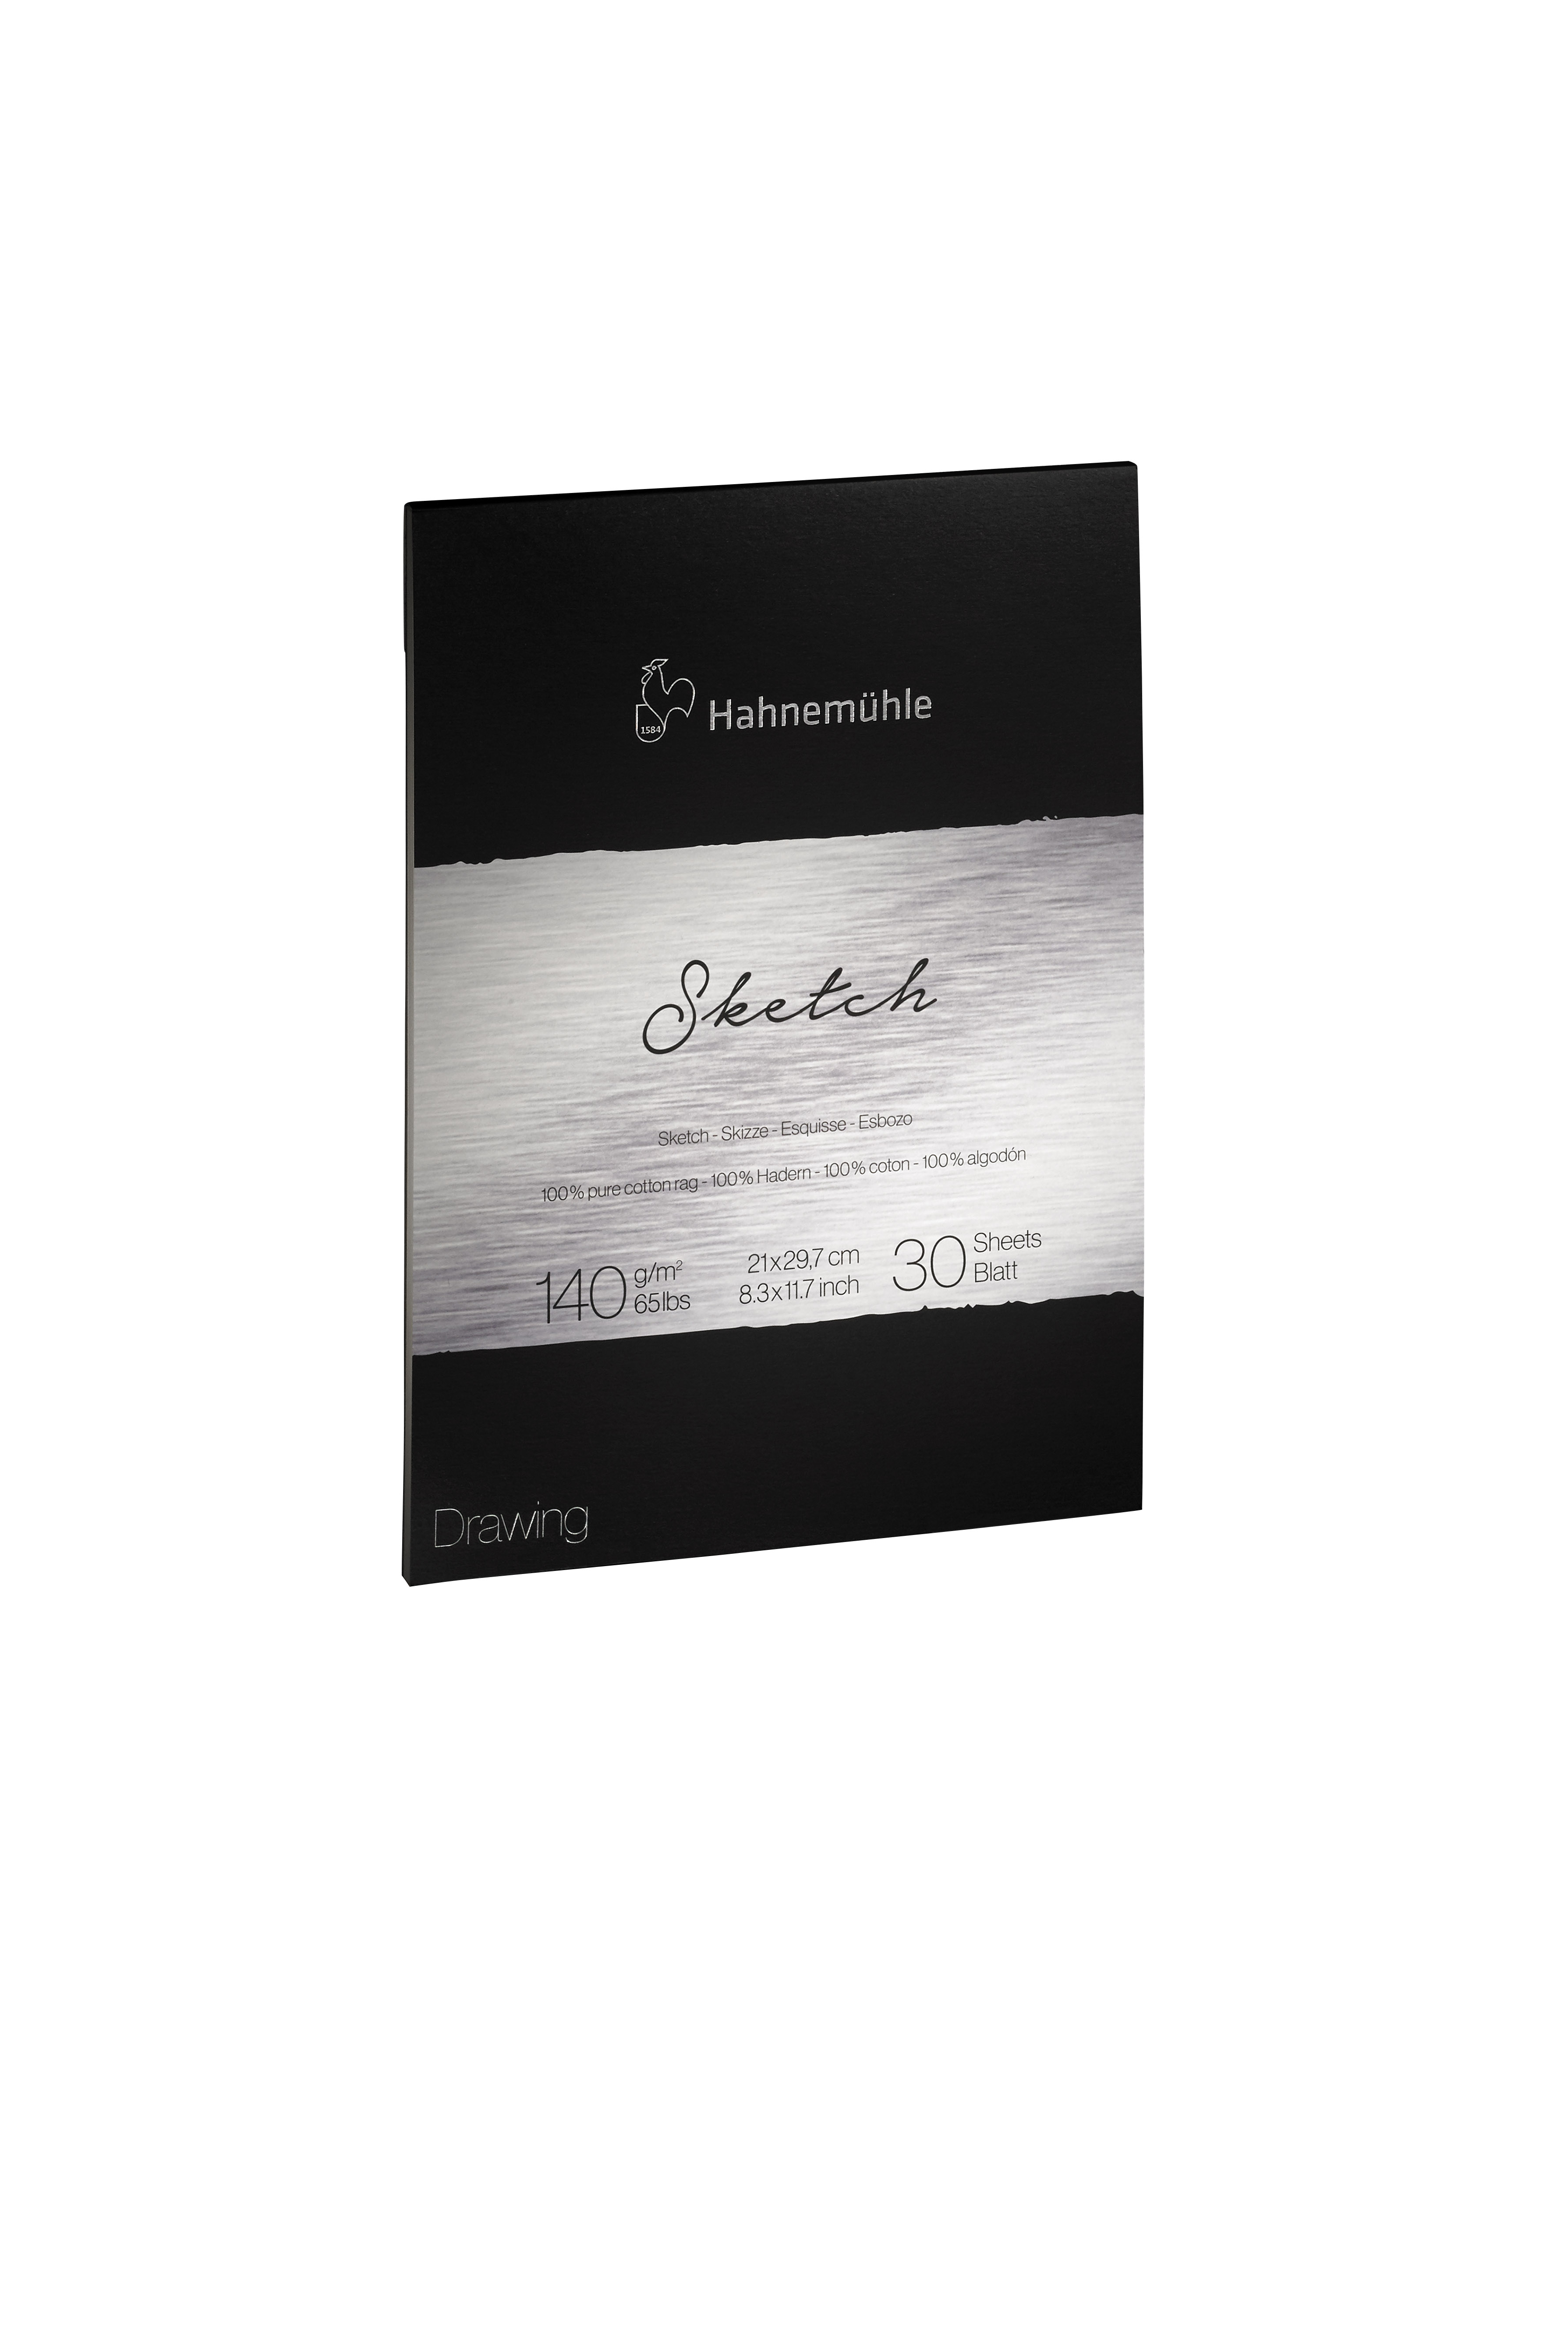 Hahnemuhle THE COLLECTION Sketch Pad 140g/m